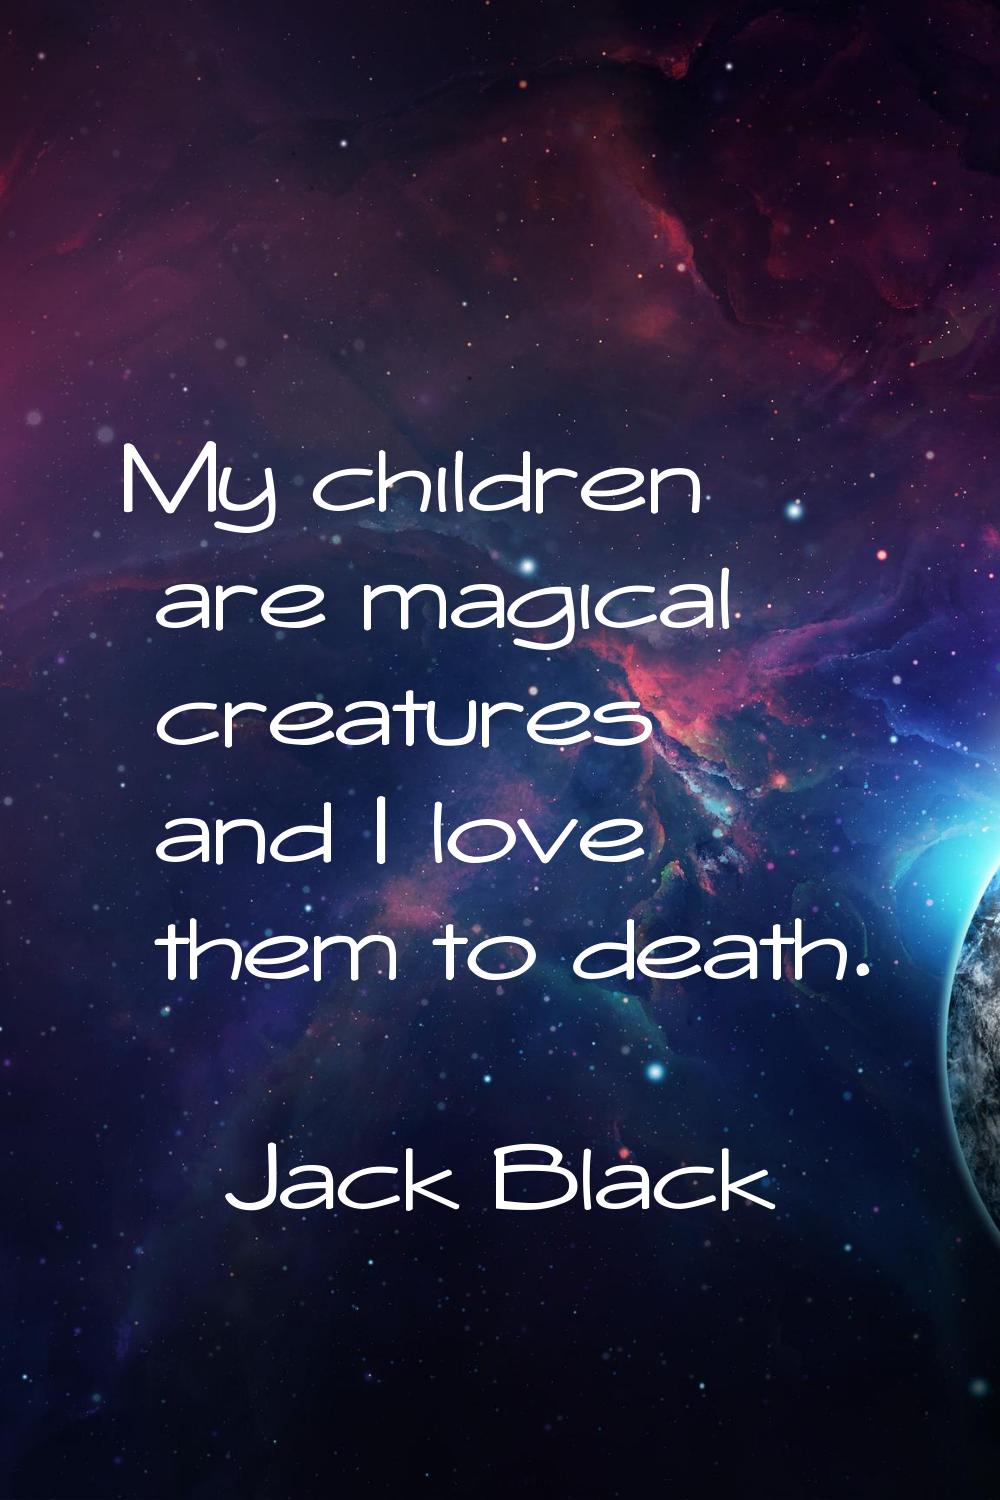 My children are magical creatures and I love them to death.